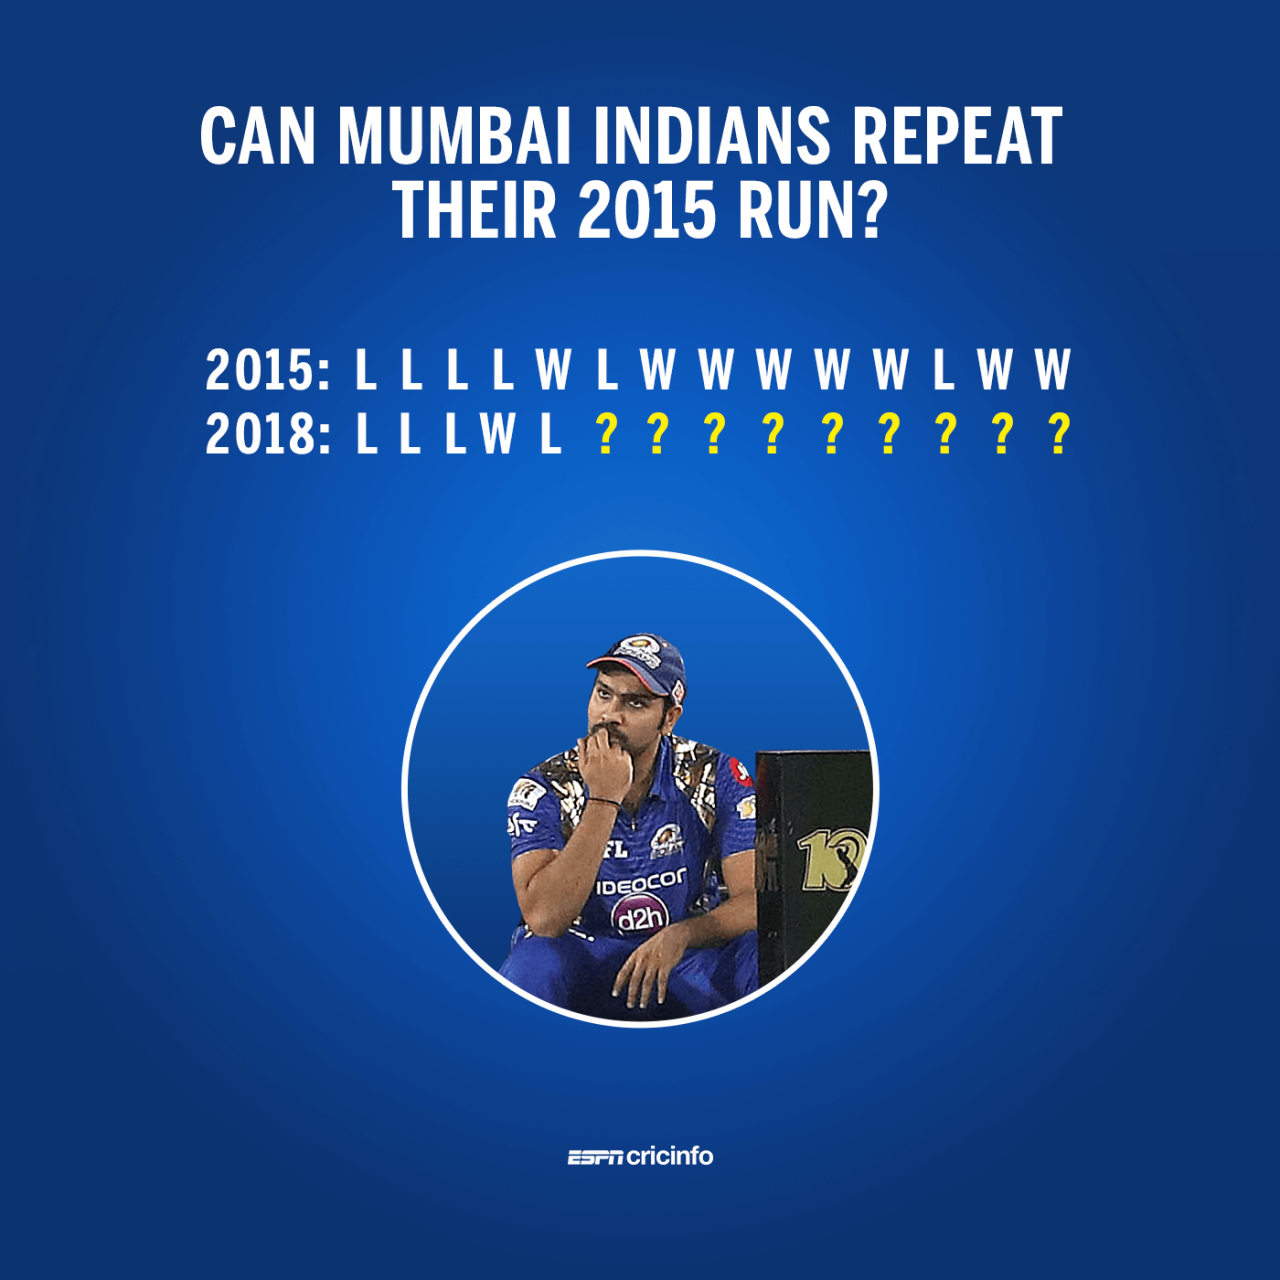 Mumbai Indians came back from a horror start to win the IPL in 2015. They'll need something similar this time